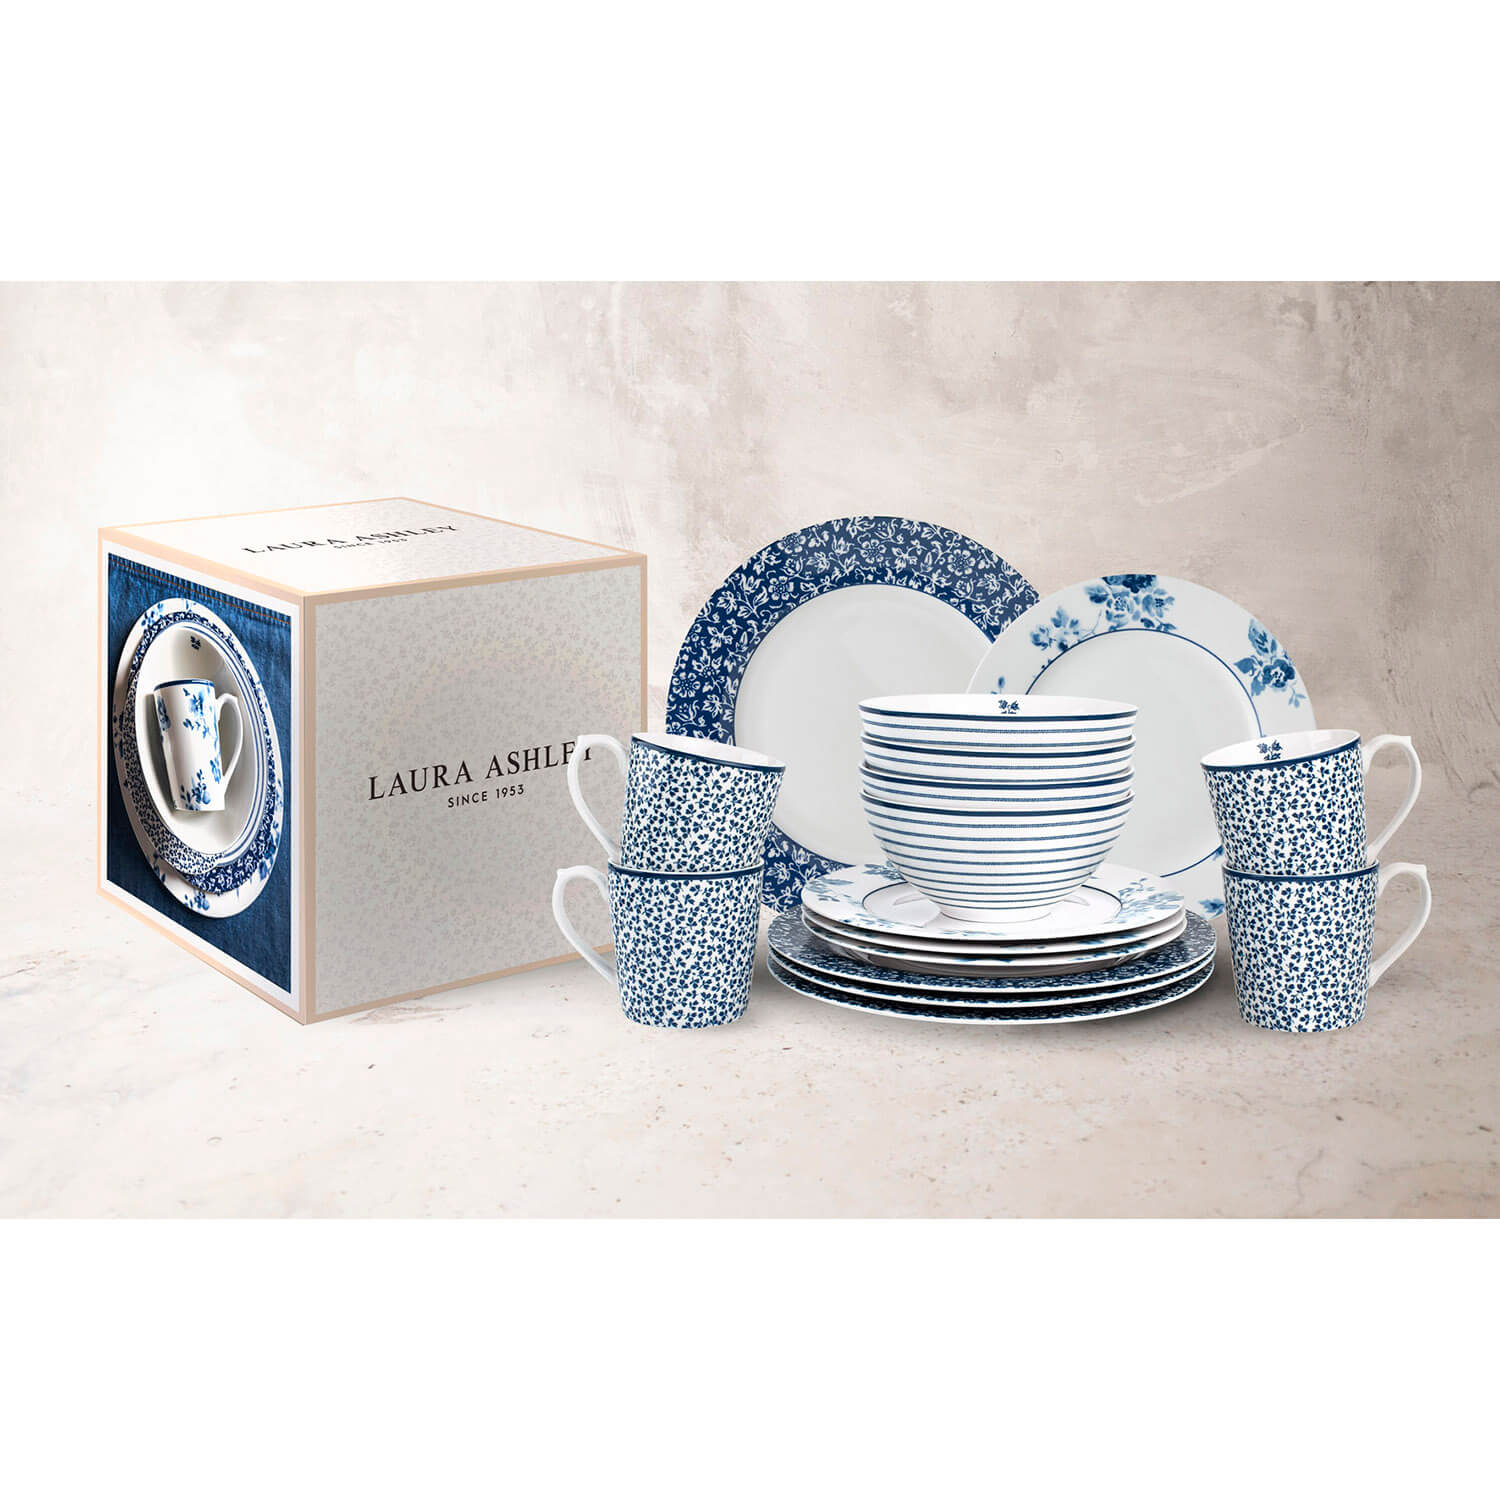 Laura Ashley Blueprint Collectables 16-Piece Tableware Giftset 3 Shaws Department Stores